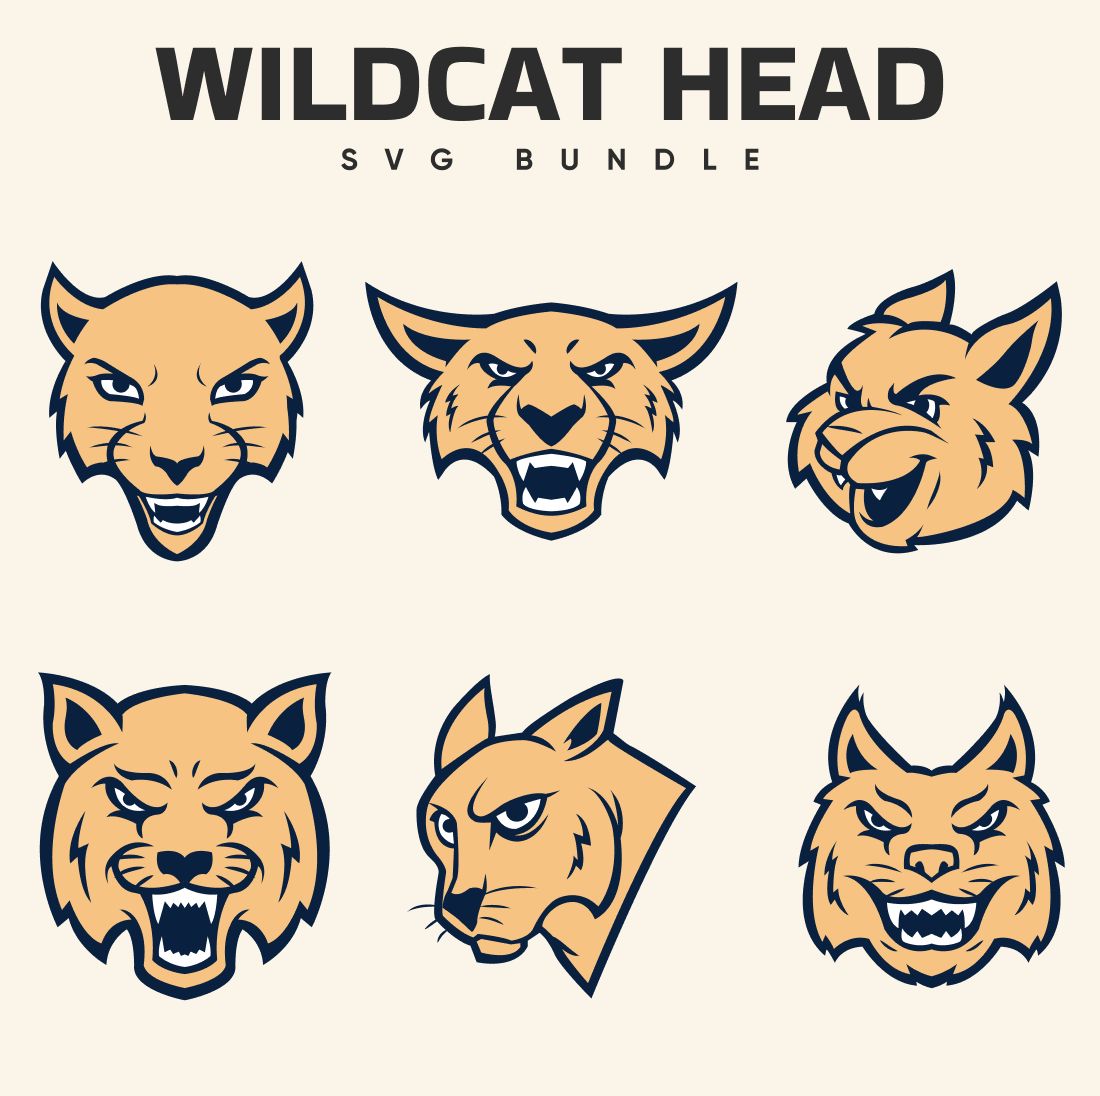 Set of wildcat heads with different expressions.